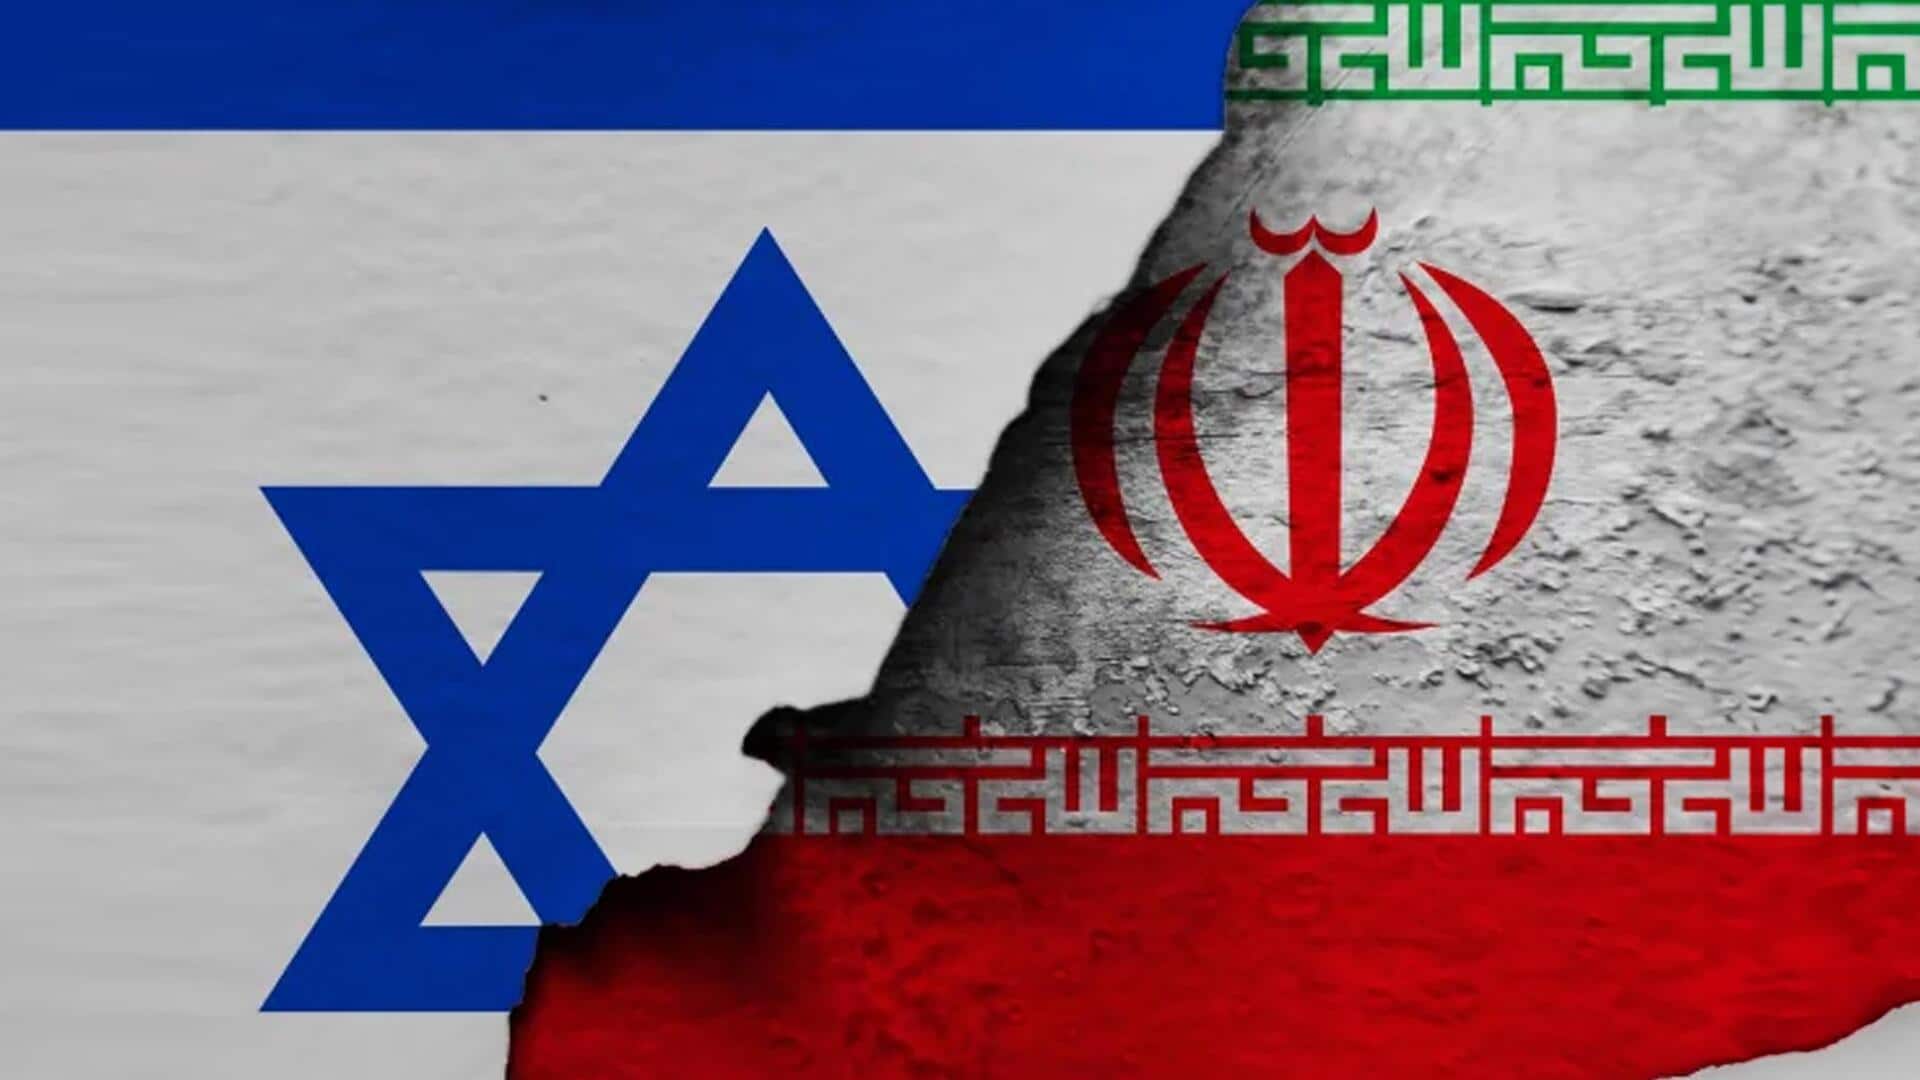 Explained: Iran-Israel relations over the years